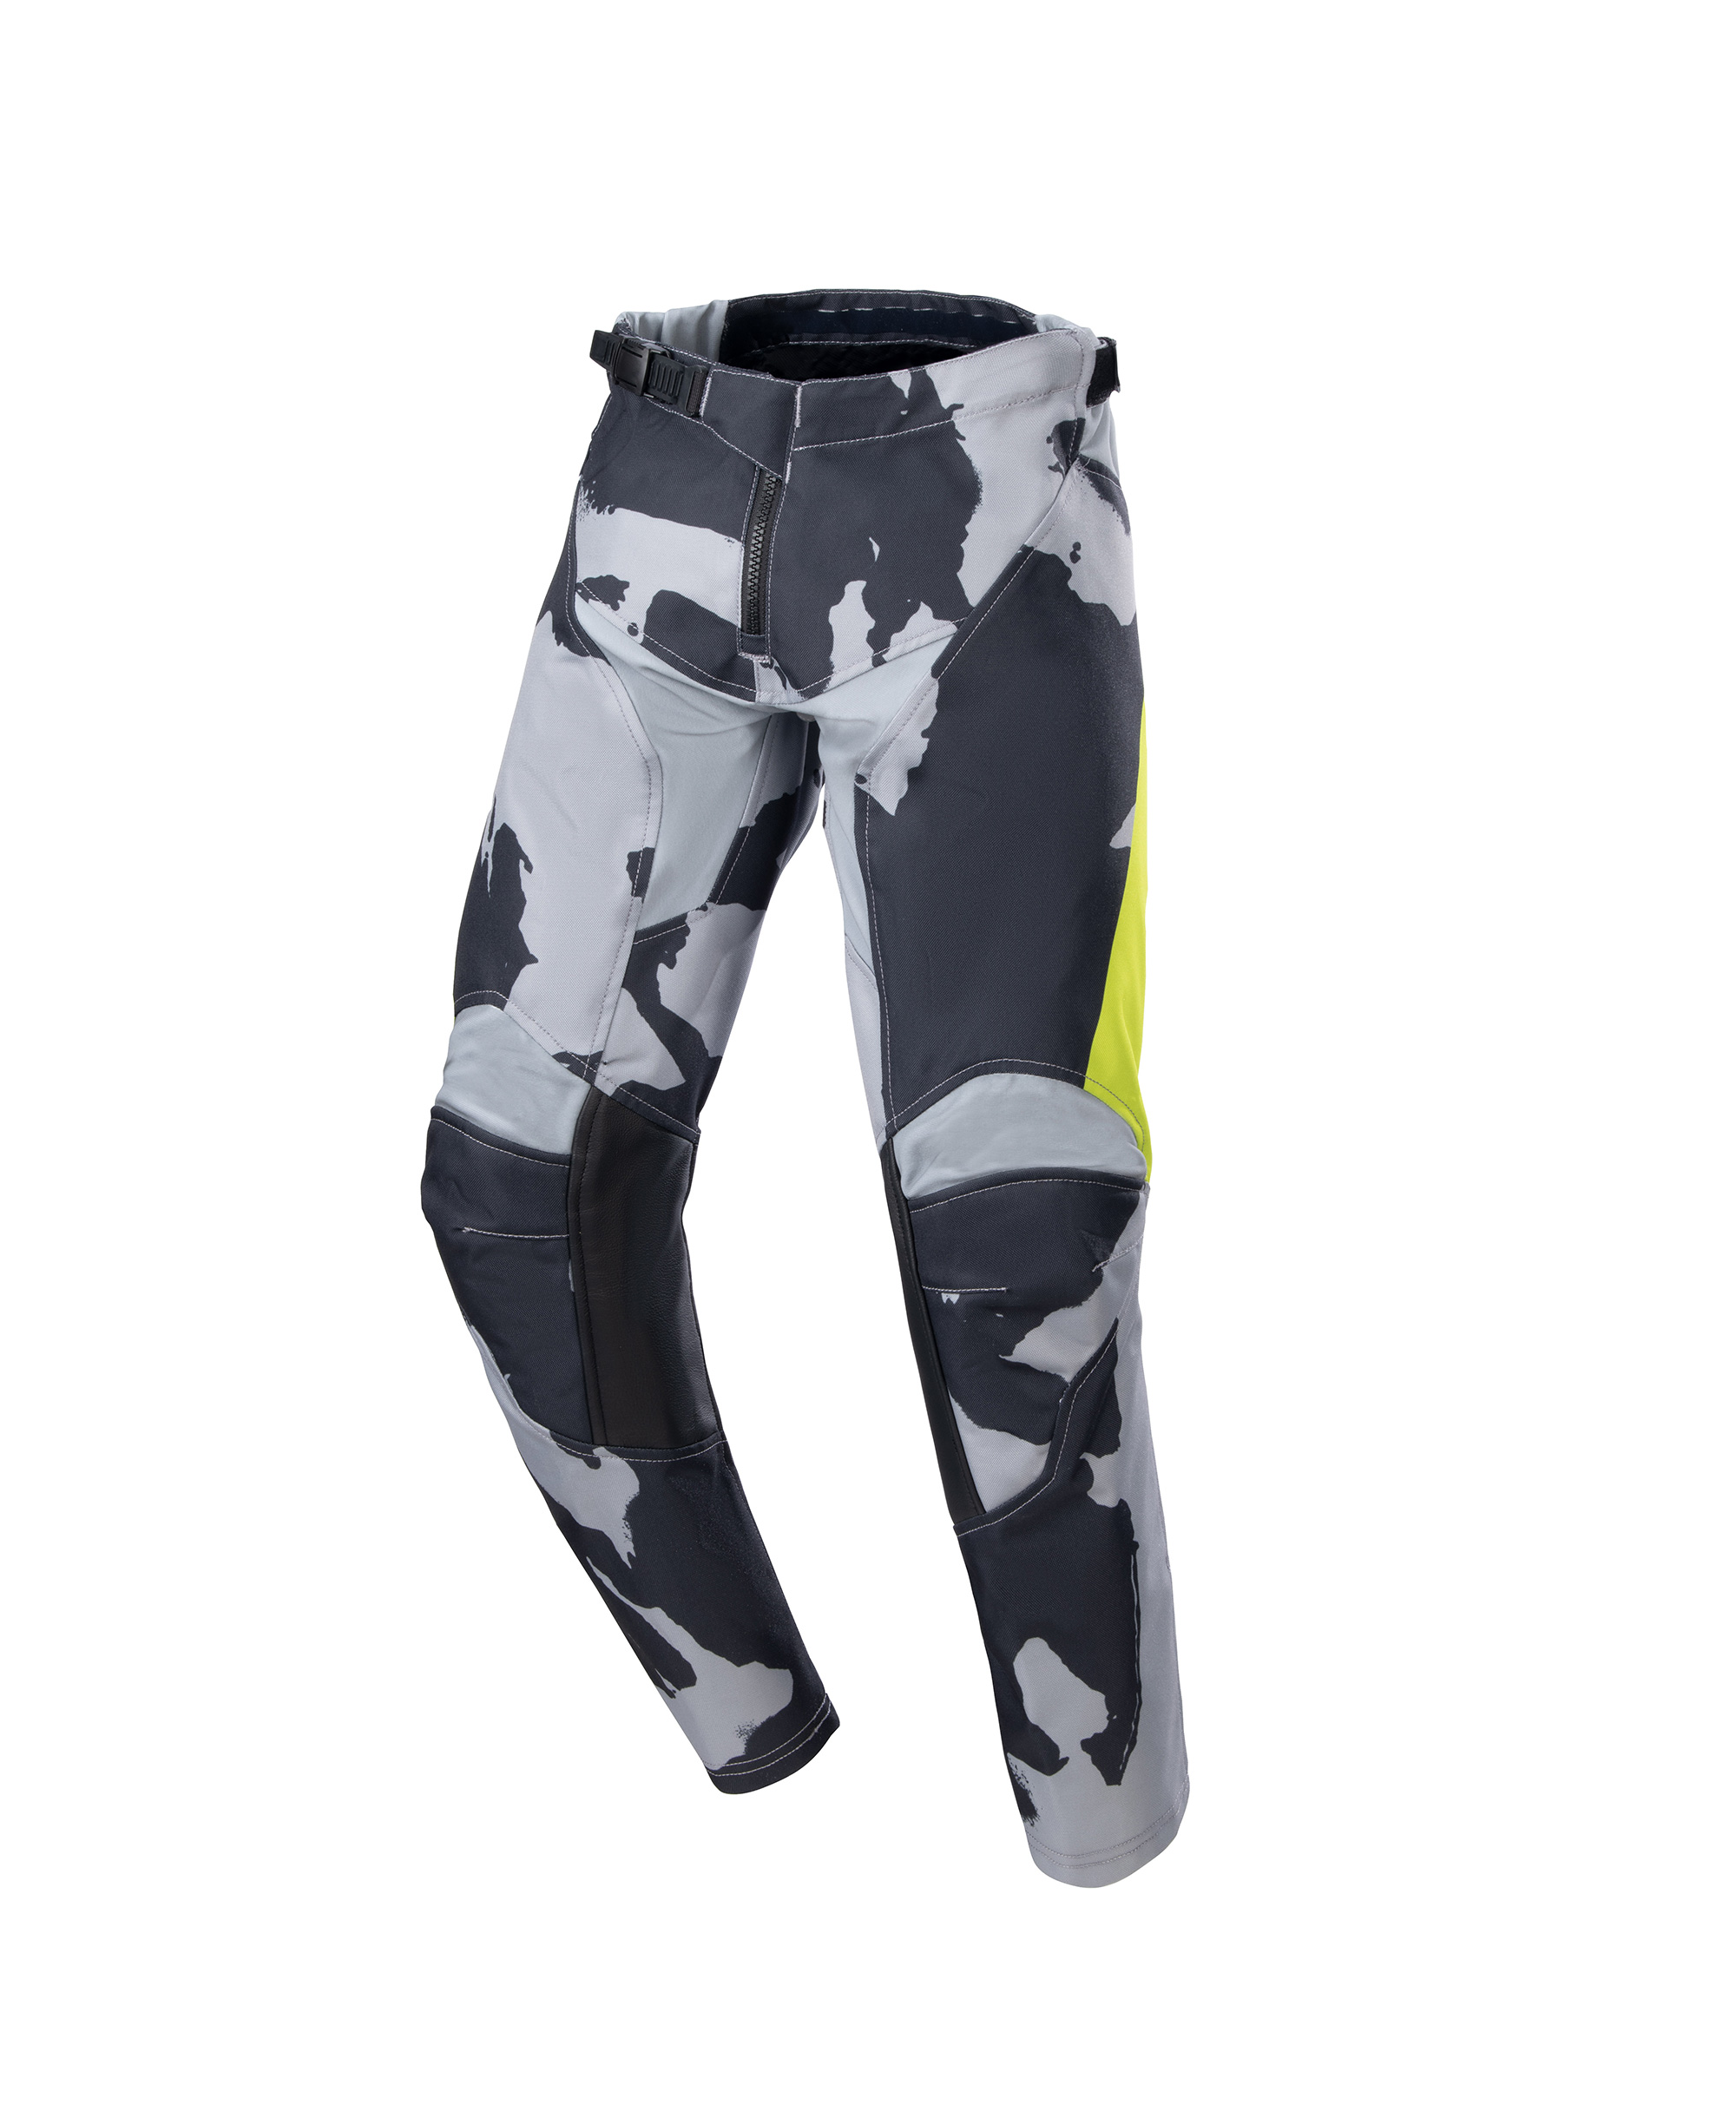 YOUTH RACER TACTICAL PANTS